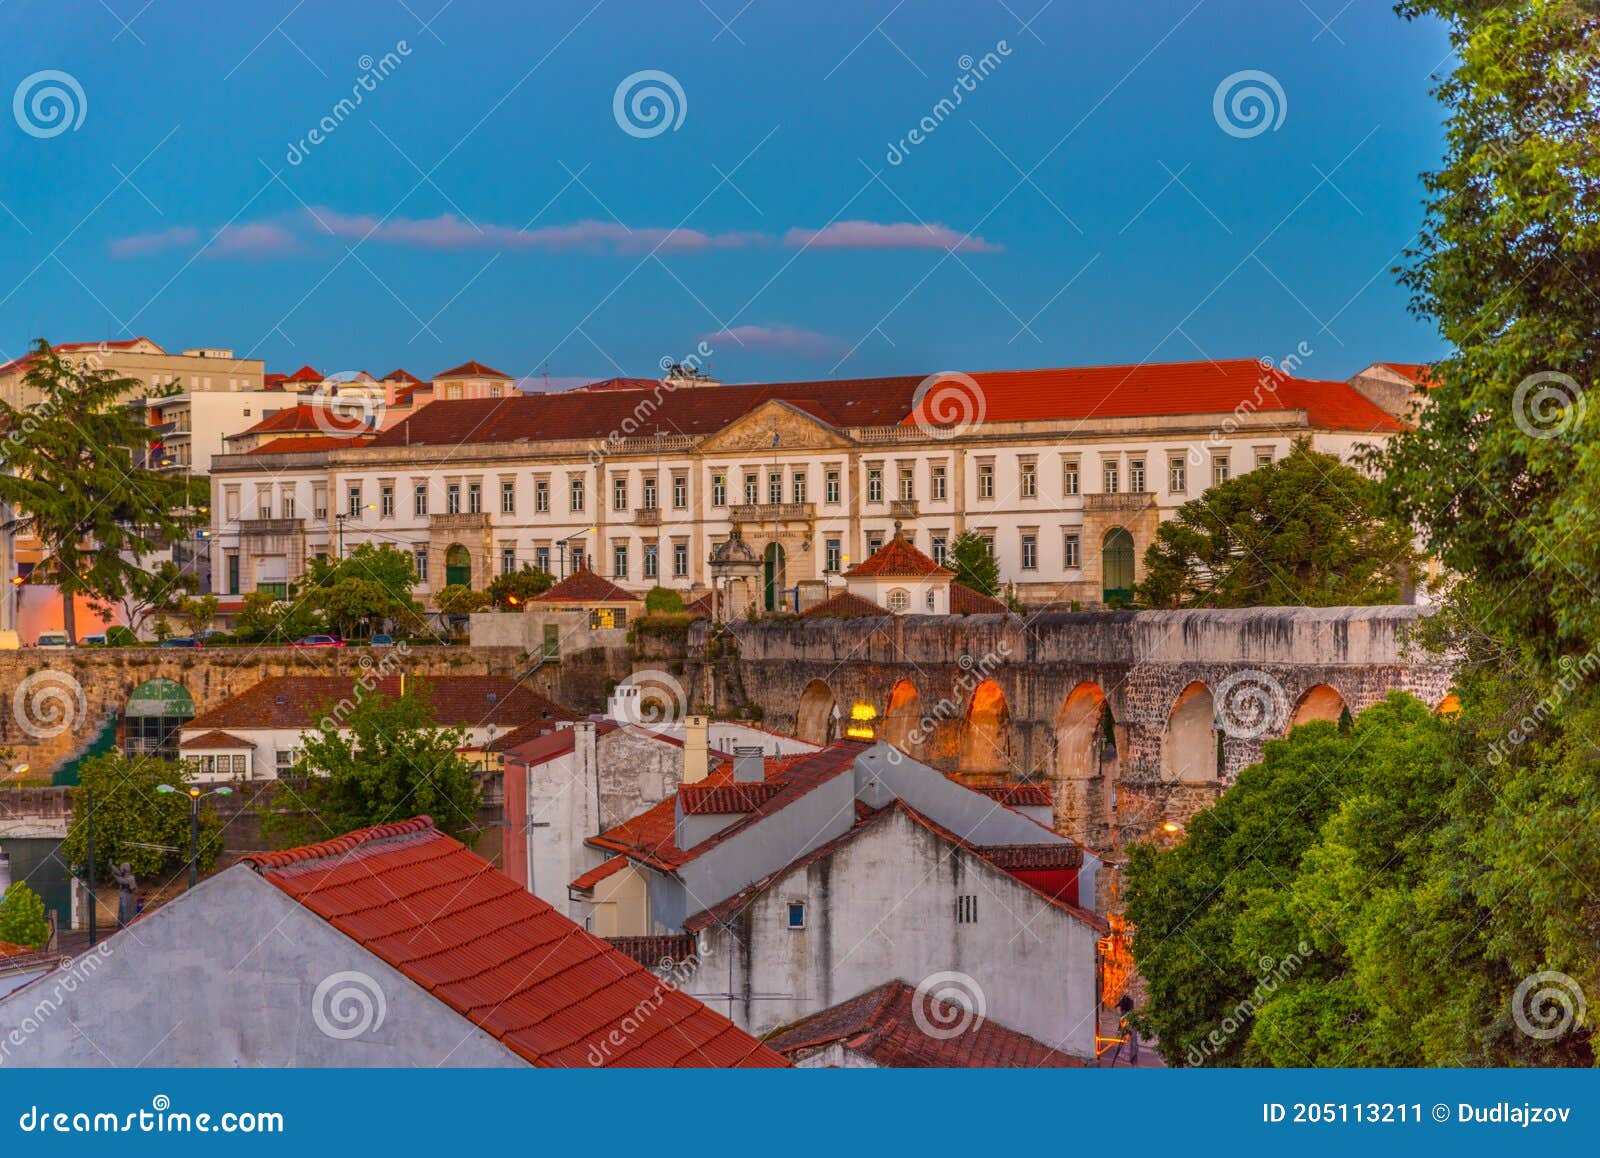 sunset view of coimbra dominated by a military building, portugal